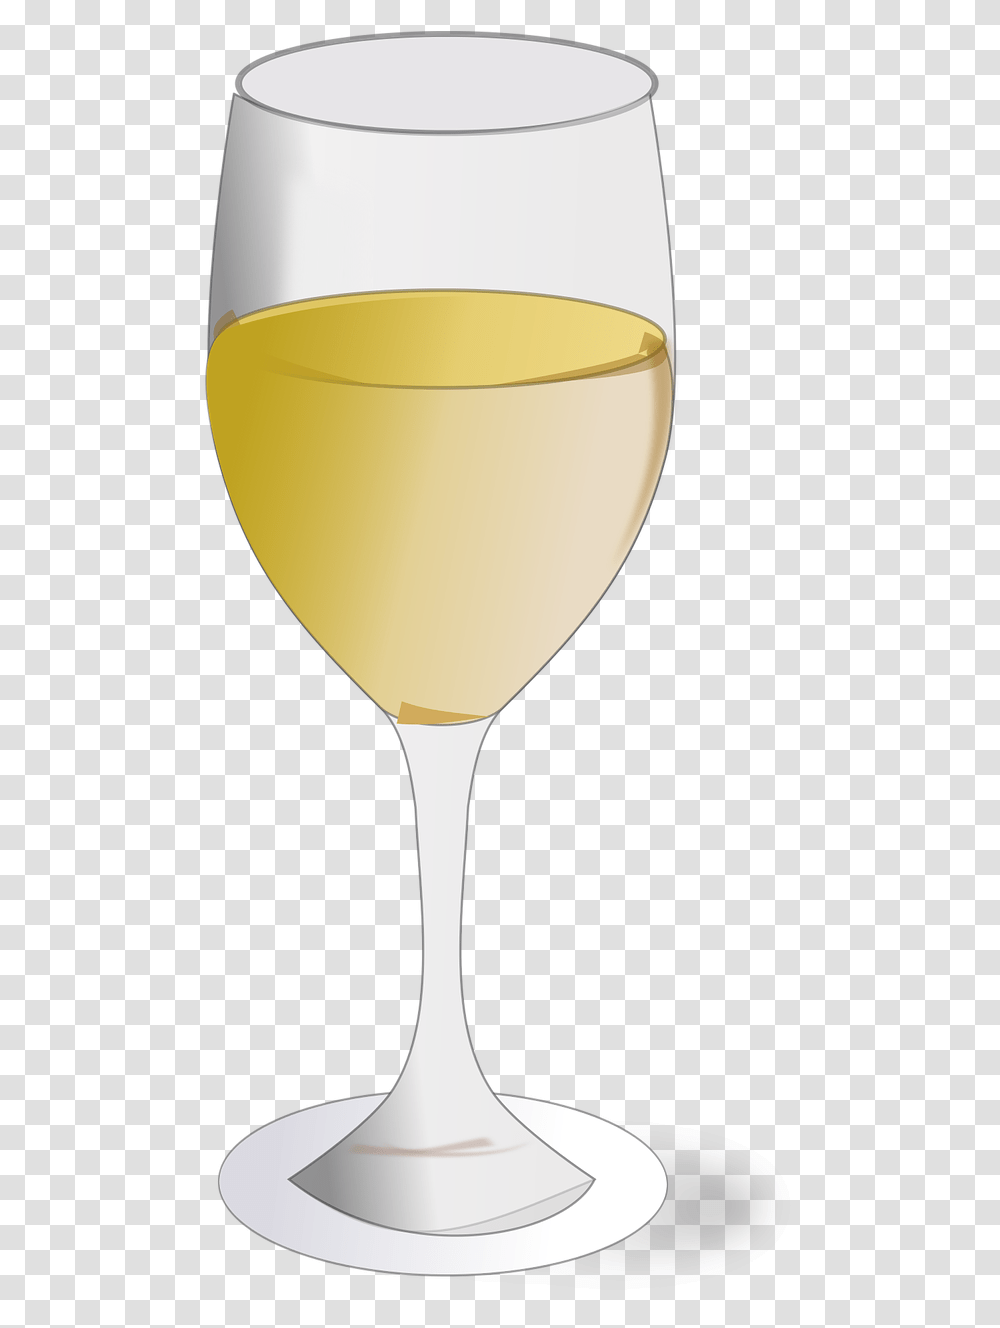 Glass White Wine Wine Glass Free Photo Wine Glass, Lamp, Beverage, Drink, Alcohol Transparent Png